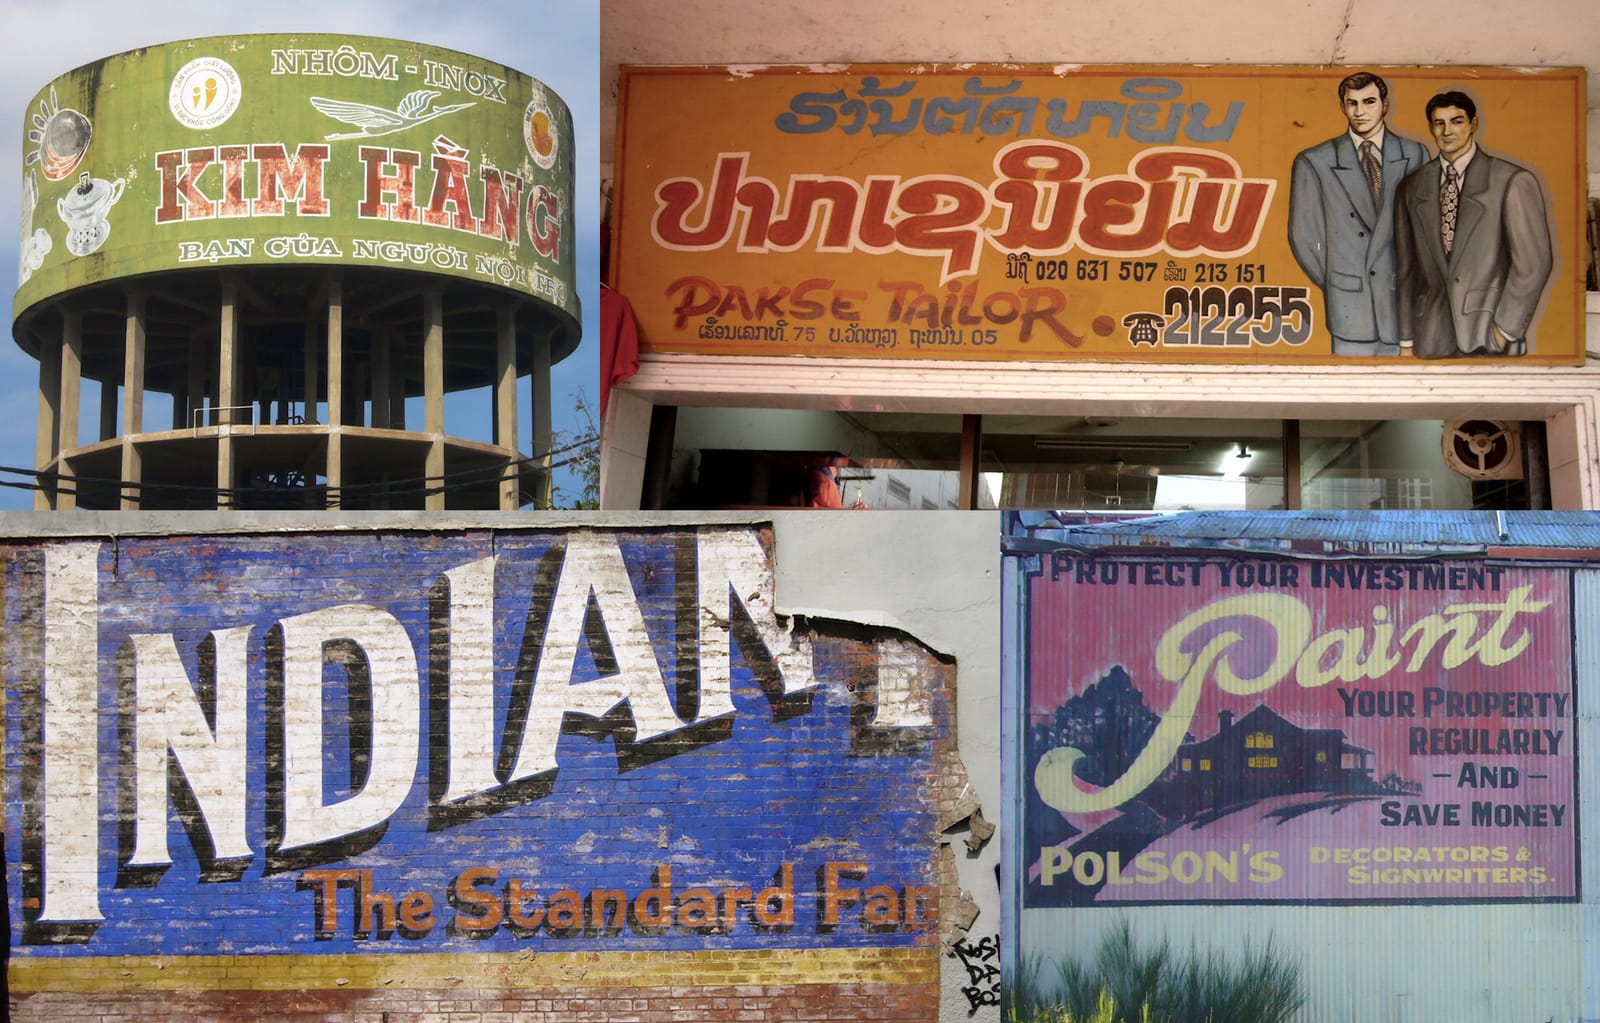 Array of four photos showing hand-painted signs on top of a tower, a shopfront, a wall, and a corrugated siding respectively.